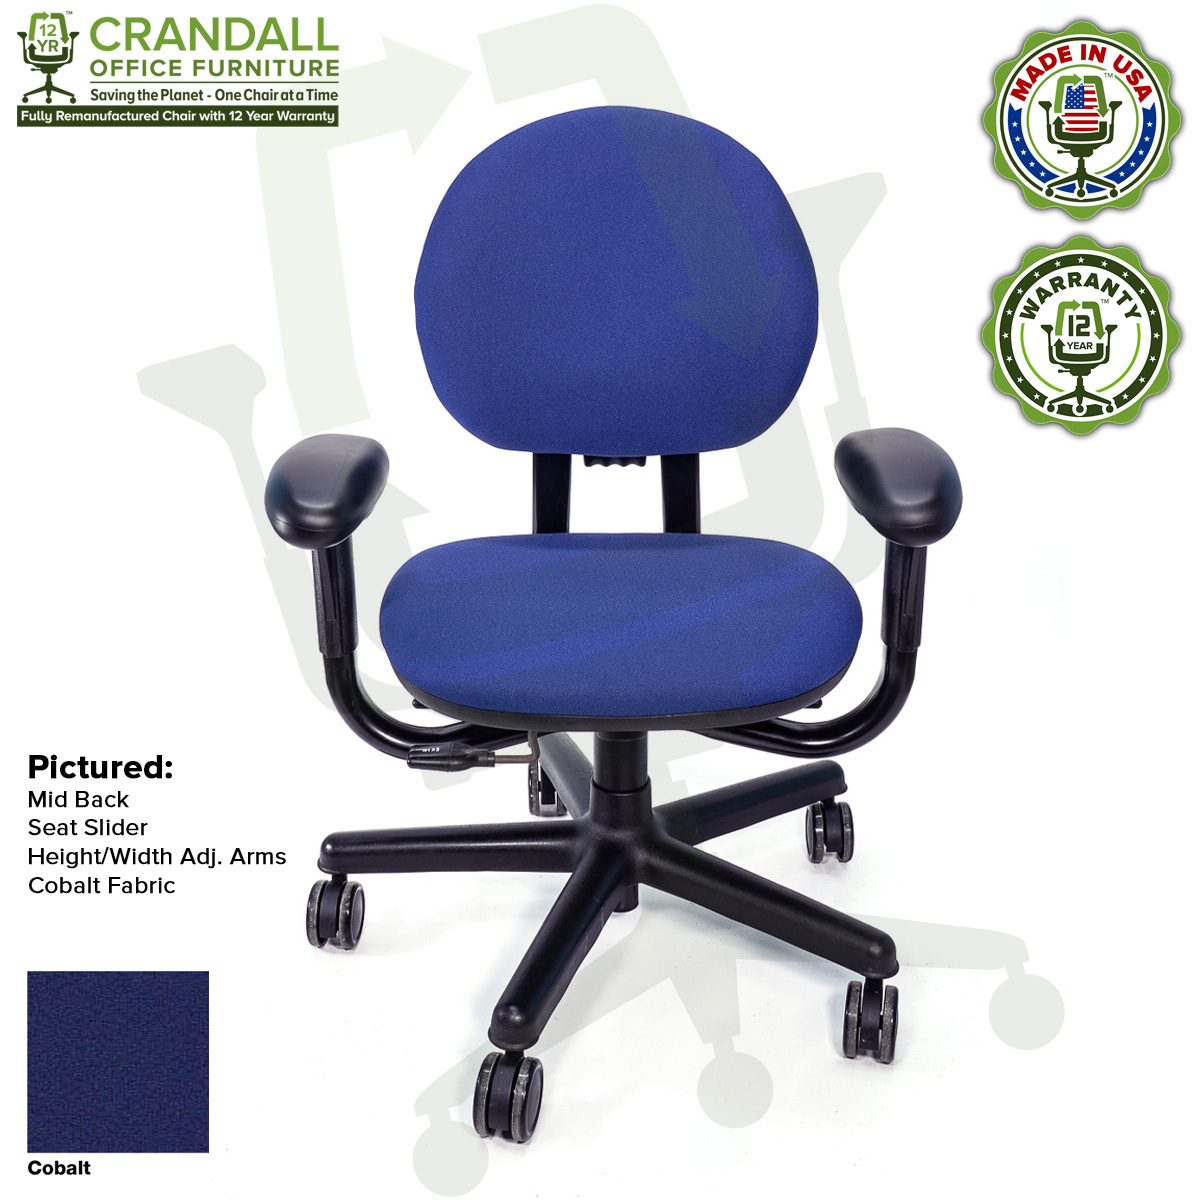 Crandall Office Furniture Remanufactured Steelcase Criterion Chair with 12 Year Warranty - 10 - Cobalt Fabric